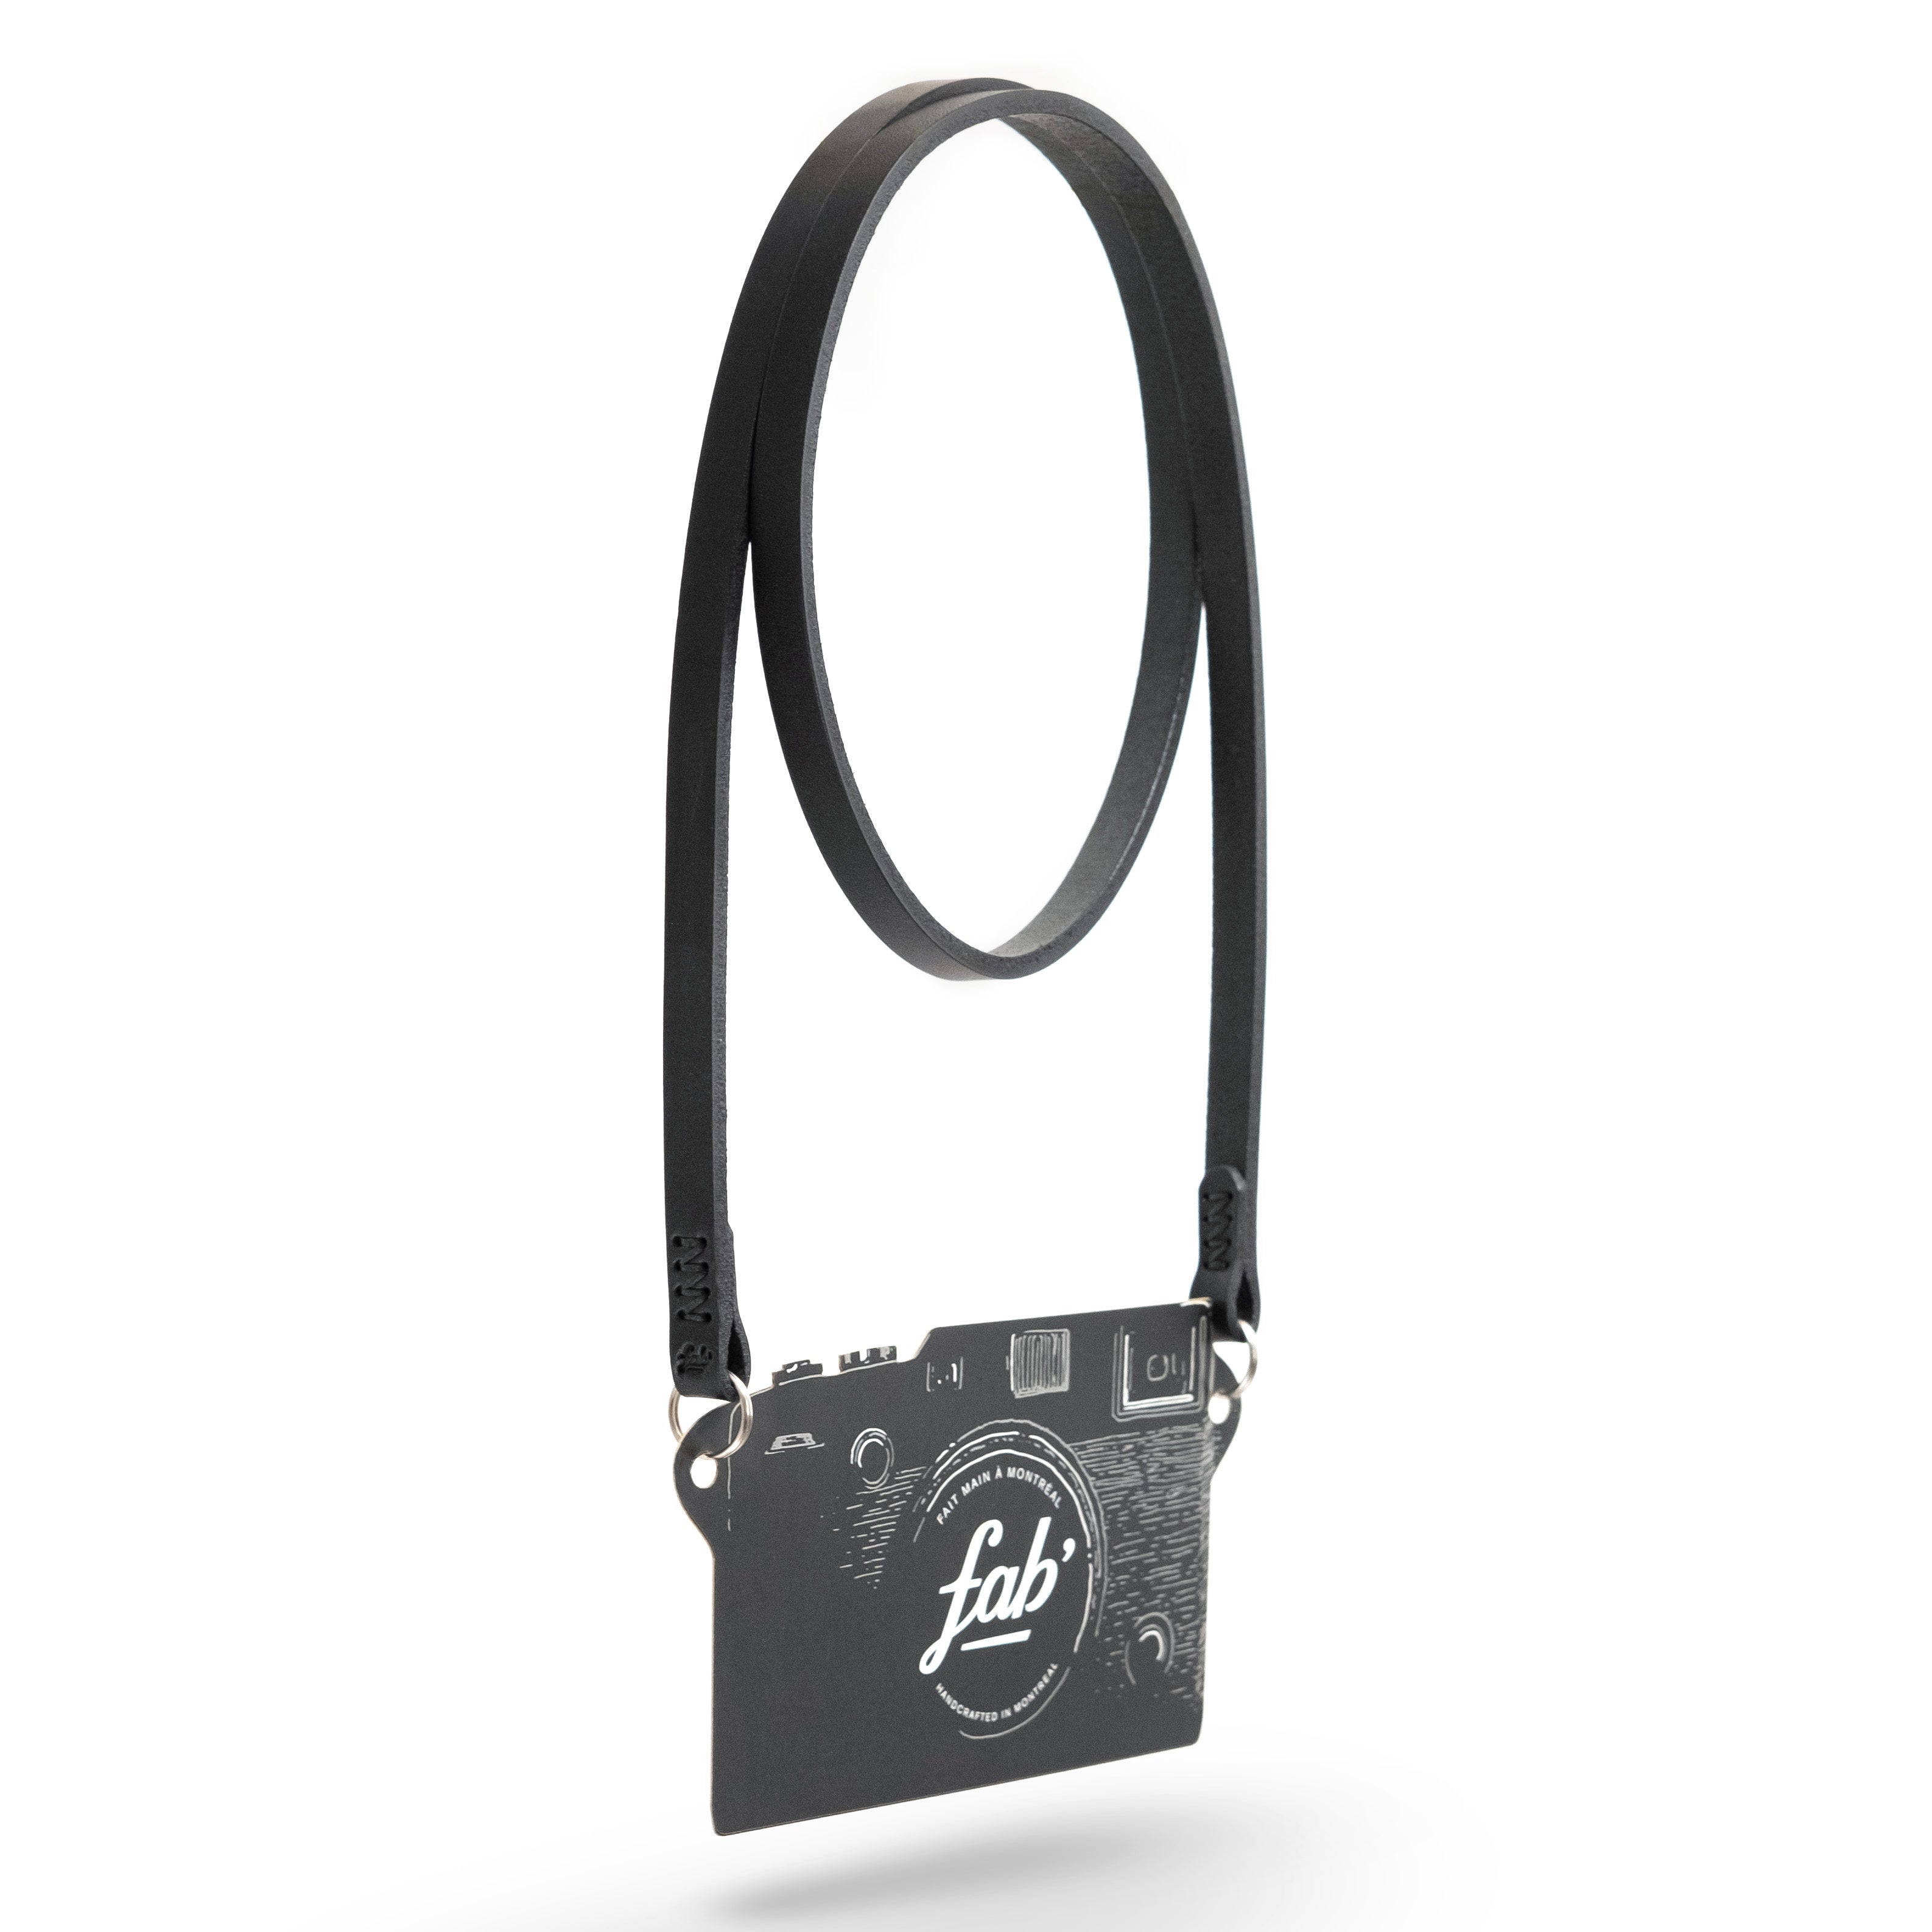 Fab' F4 strap - Black leather - Size S (39")